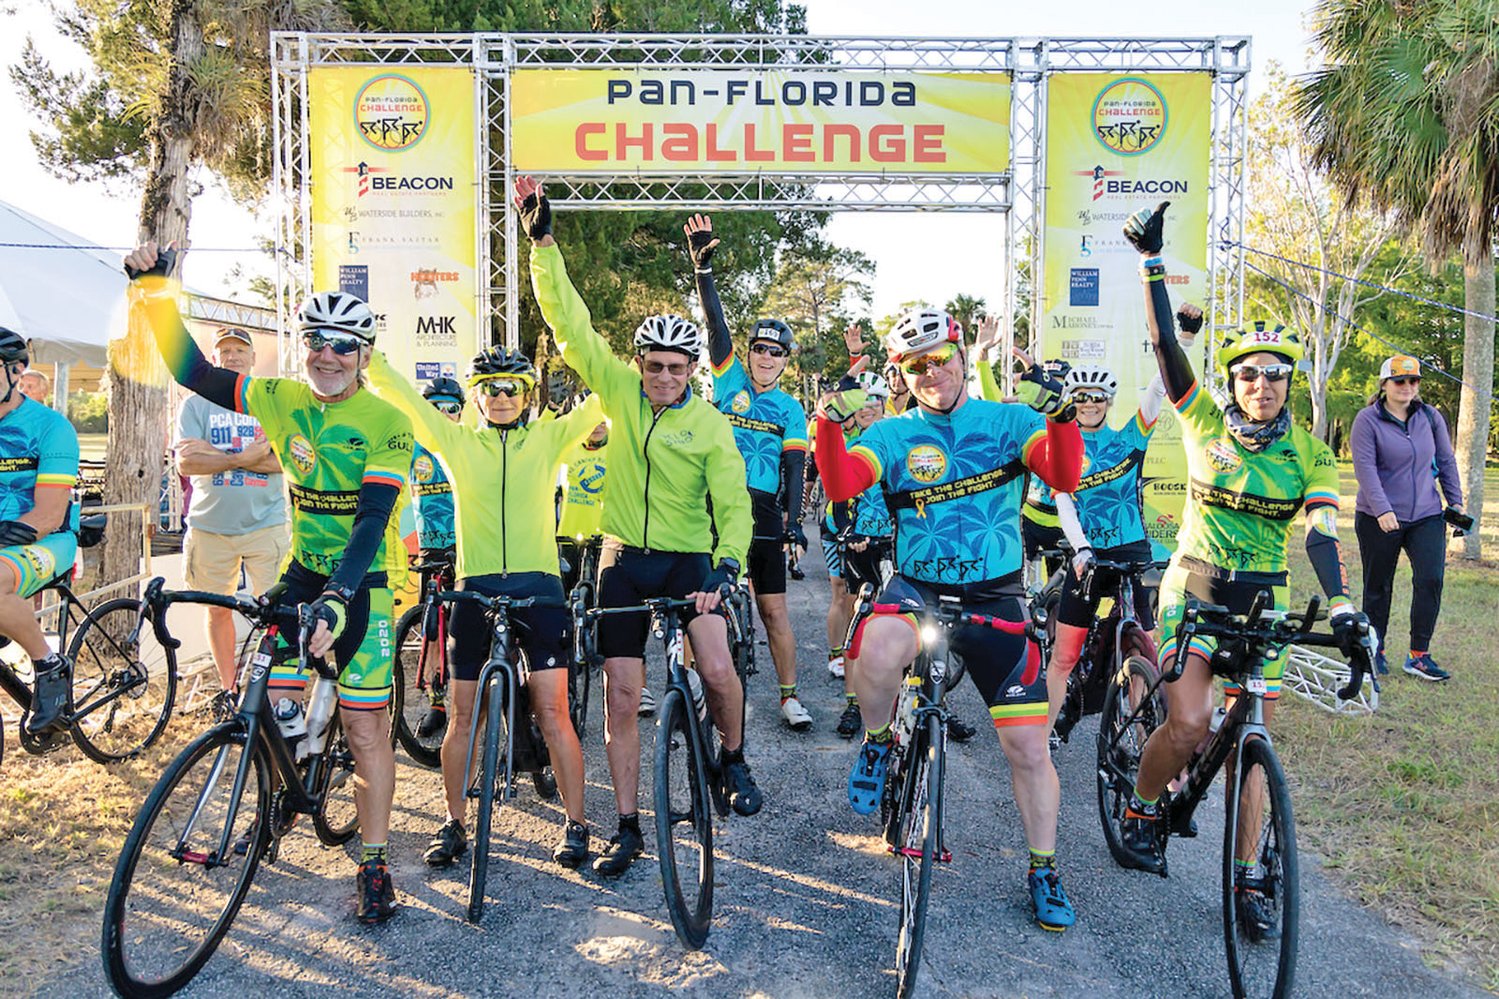 Proceeds from the annual ride and associated fundraising go directly to supporting Pan-Florida Challenge’s mission to fund cancer prevention research and education programs while providing cancer-fighting food to undernourished children across the state of Florida.